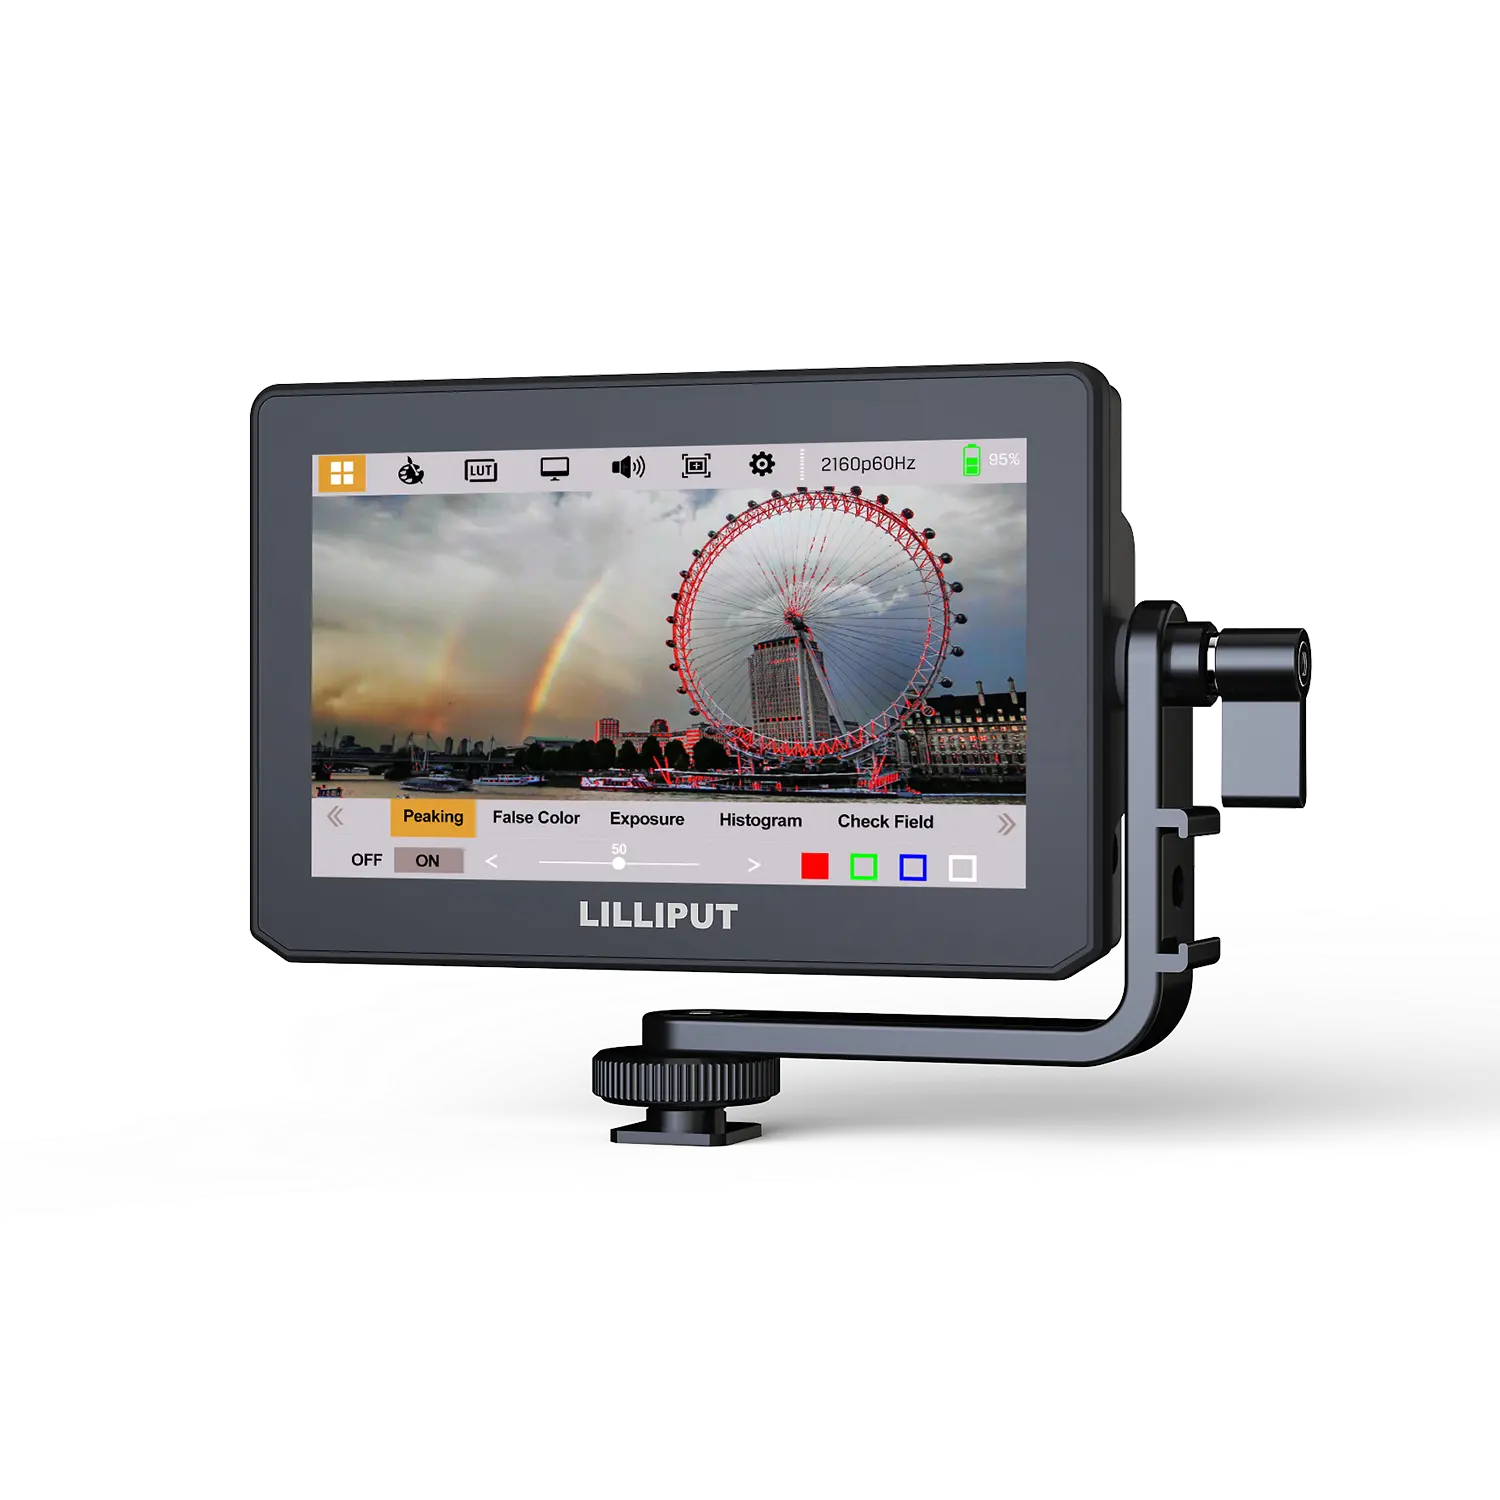 LILLIPUT Brightness 400nits 5 inch 3D LUT HDMI2.0 FHD Video Assist on camera field monitor with capacitIve touch screen